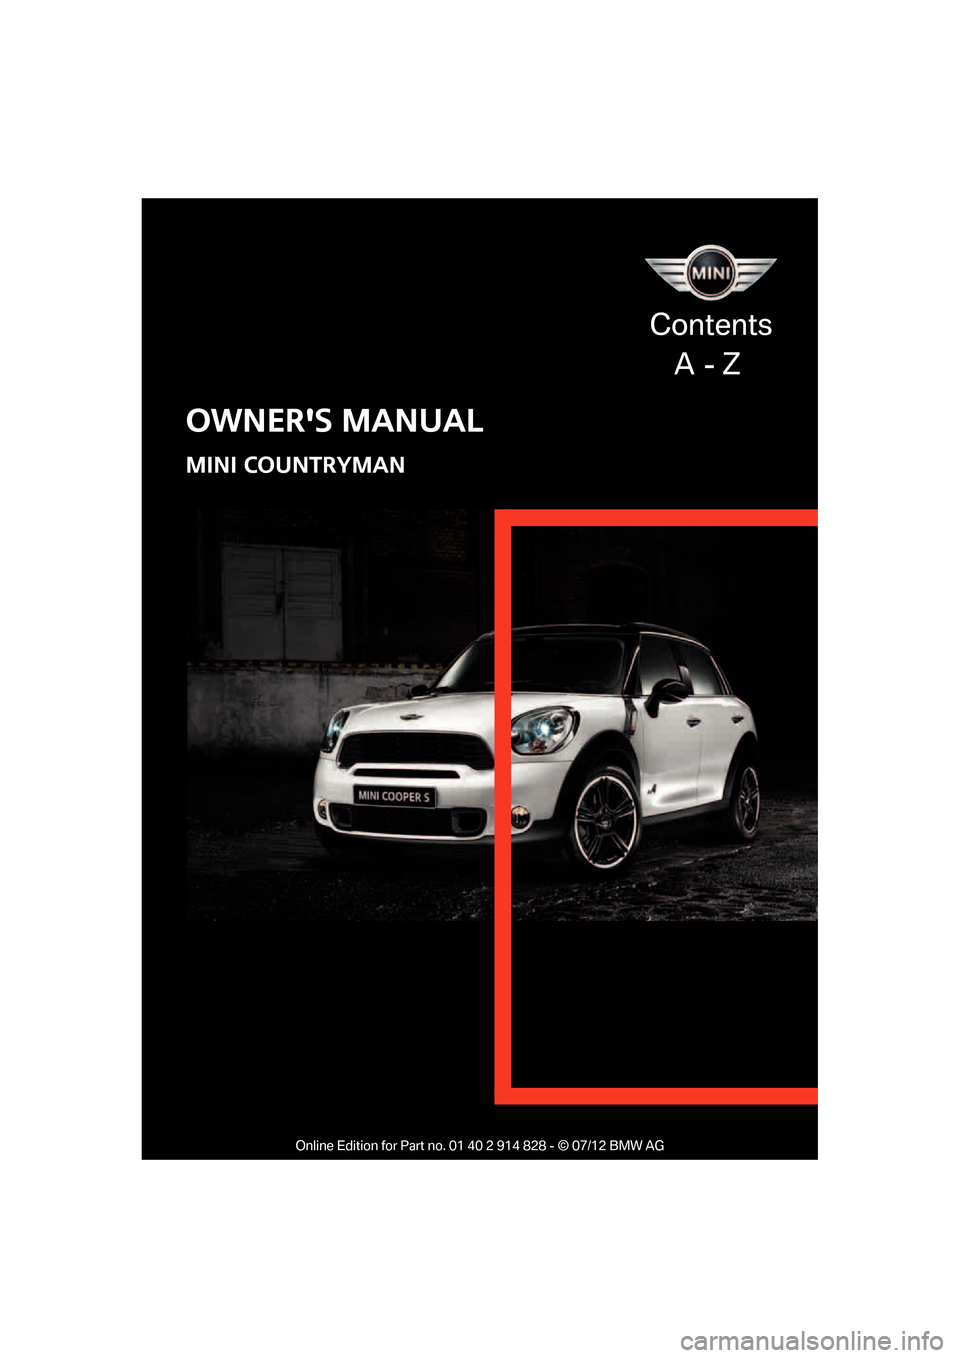 MINI Countryman 2012  Owners Manual OWNERS MANUAL
MINI COUNTRYMAN
Contents
    A  - Z

Online Edition for Part no. 01 40 2 914 828 - © 07/12 BMW AG  